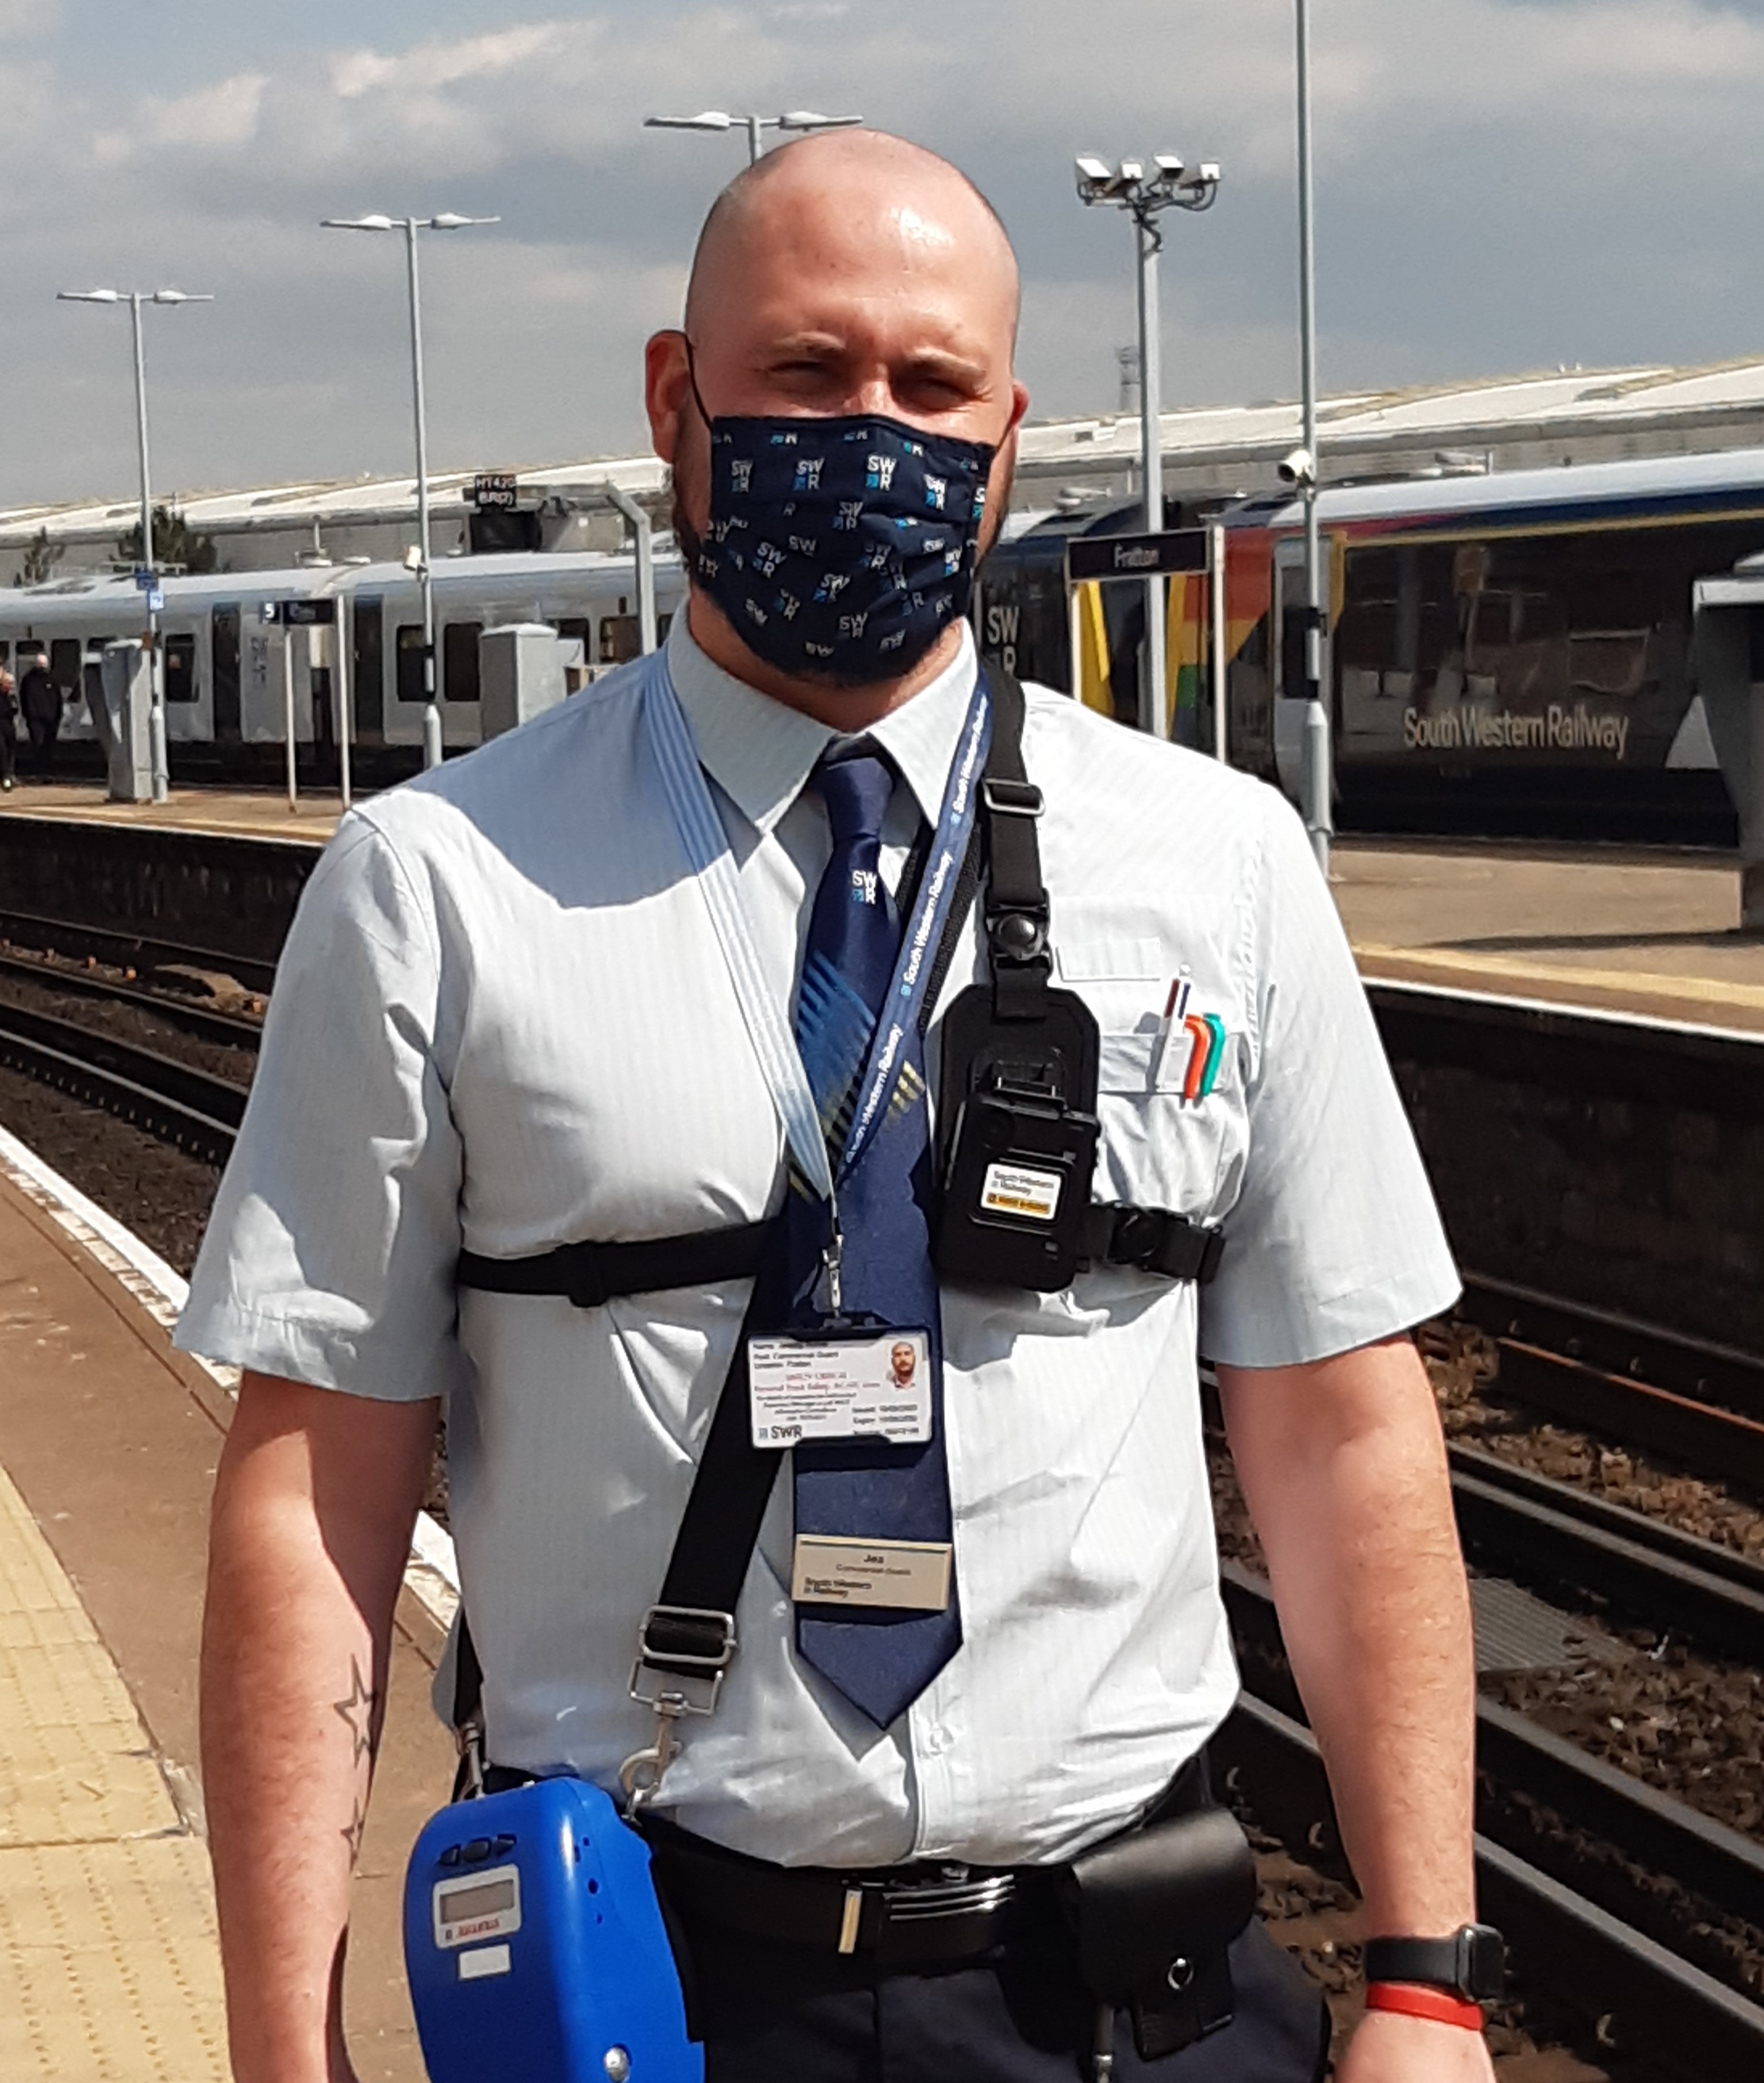 South Western Railway guards trial body worn cameras to improve customer and colleague safety